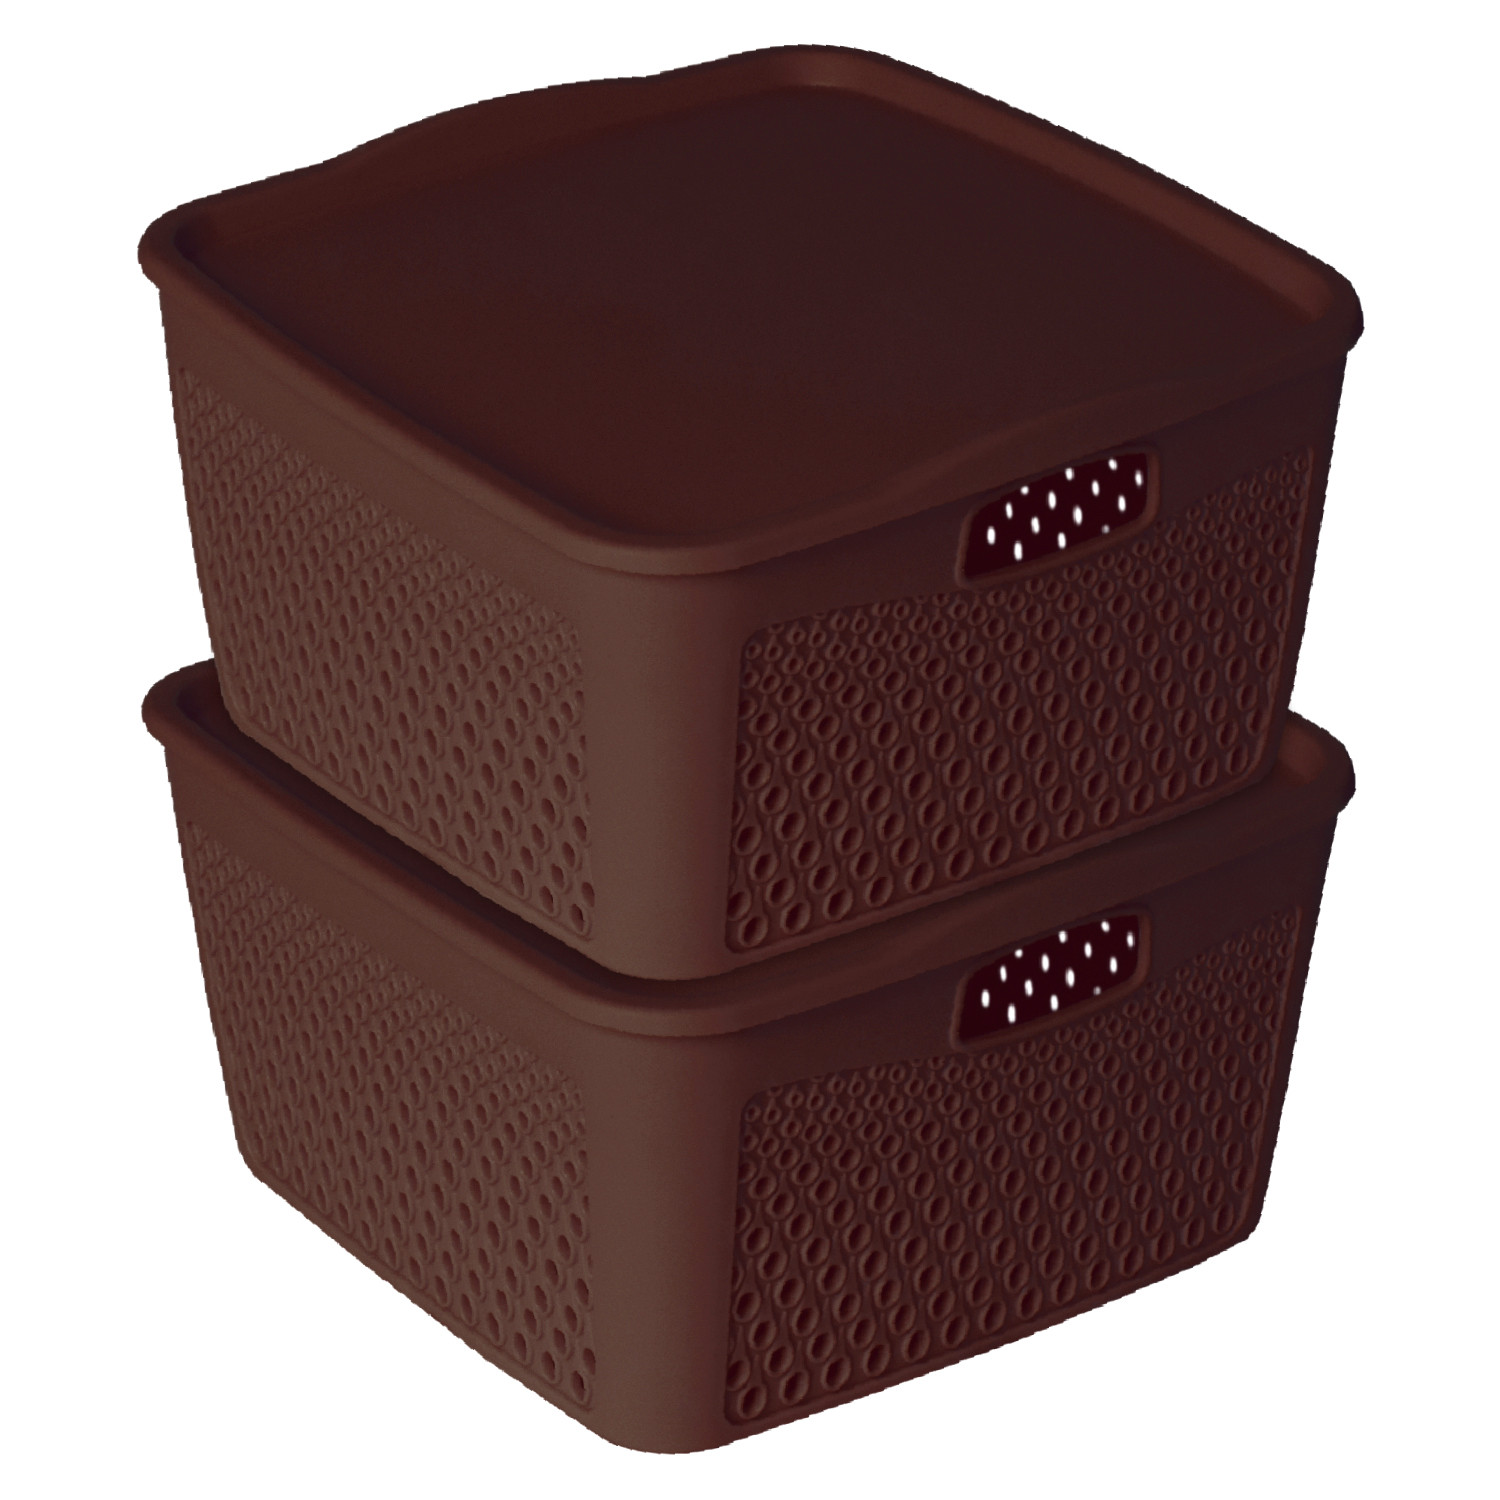 Kuber Industries Netted Design Unbreakable Multipurpose Square Shape Plastic Storage Baskets with lid Large (Brown)